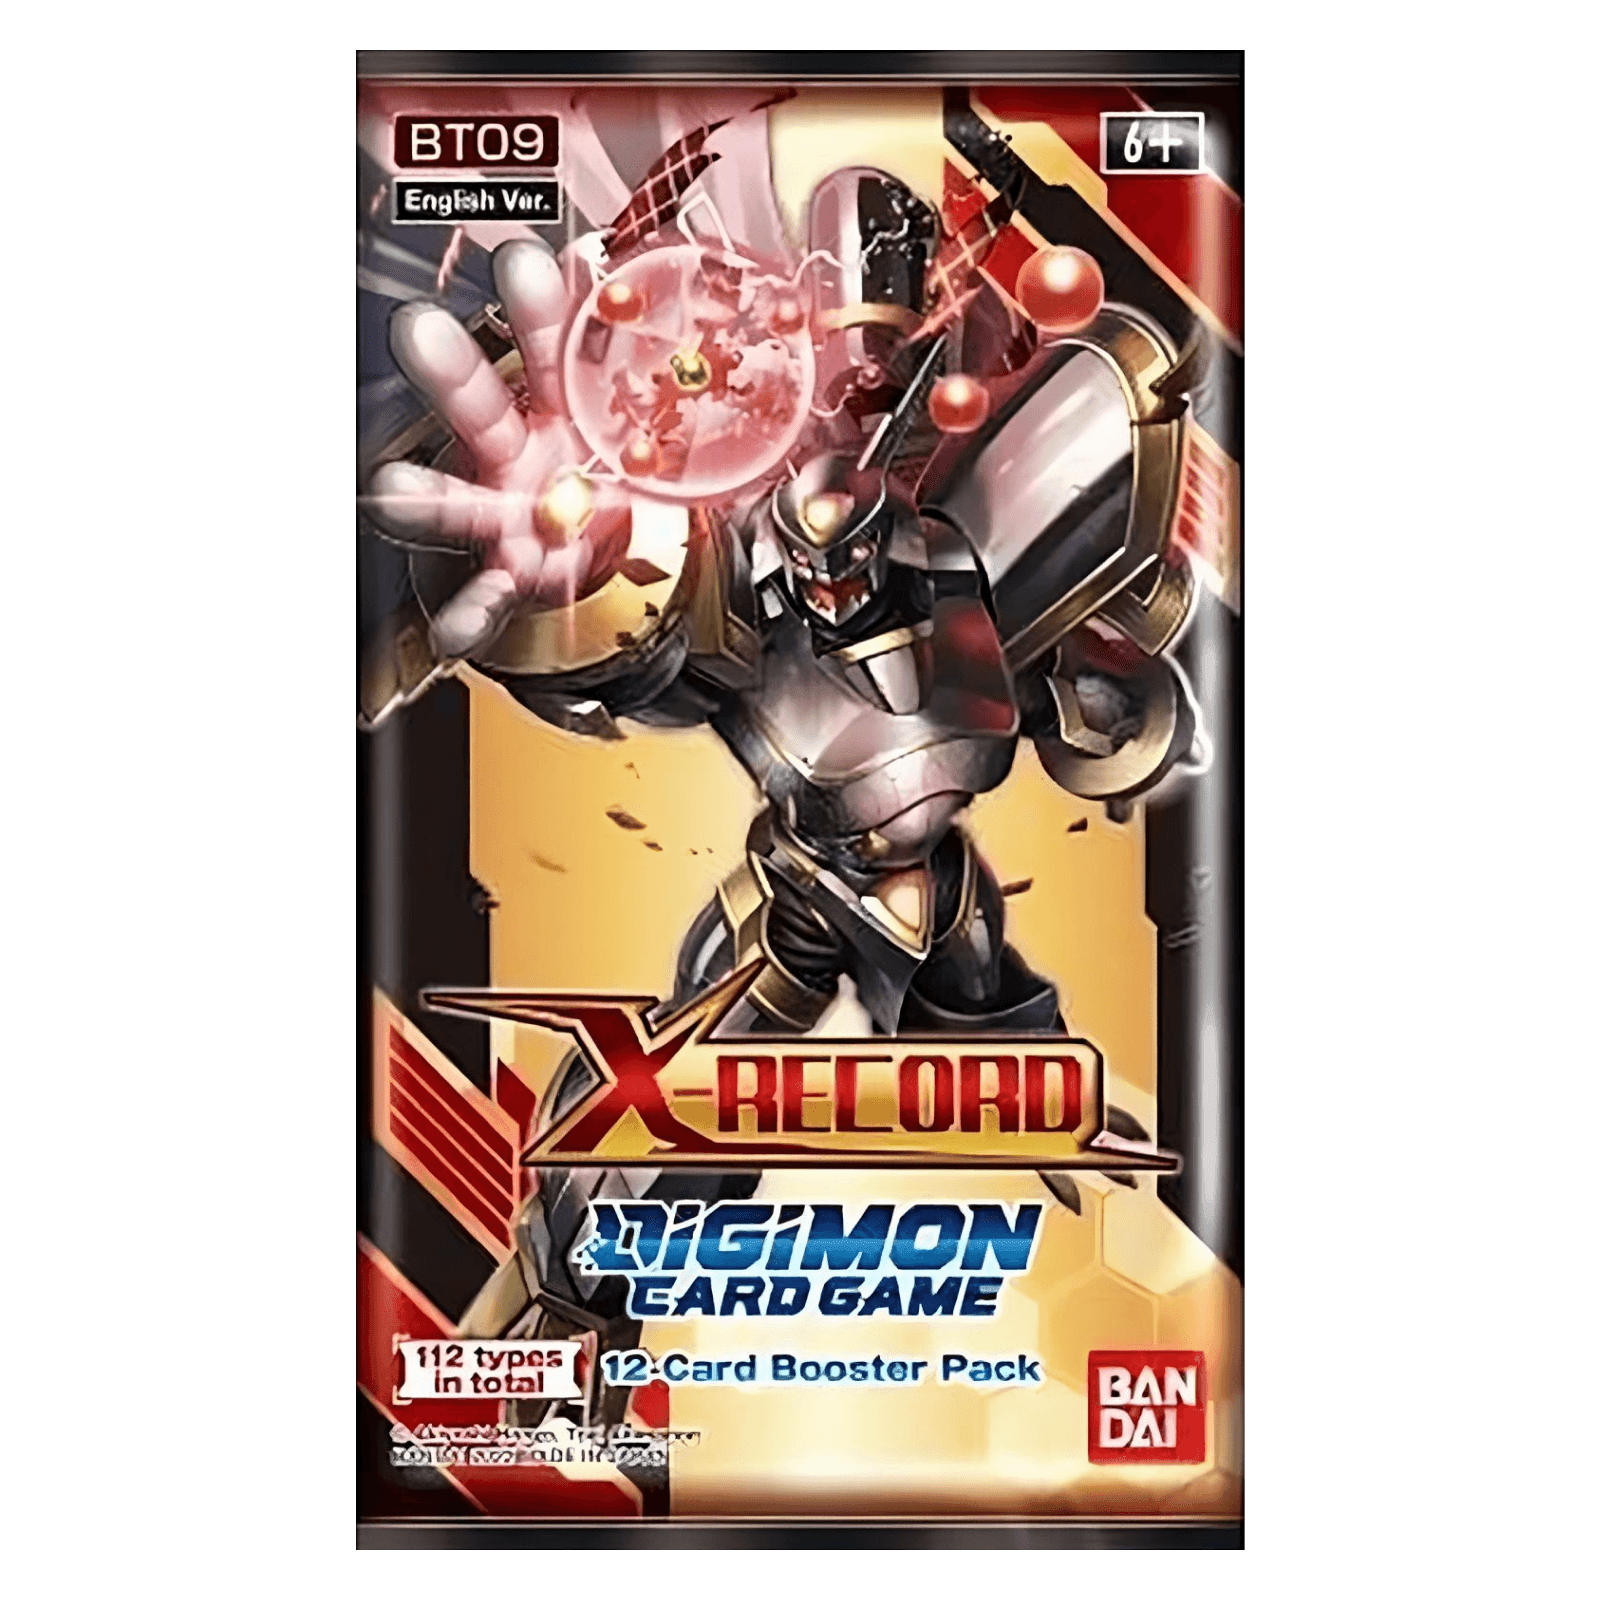 Digimon Card Game: X Record (BT09) Booster Pack - The Card Vault